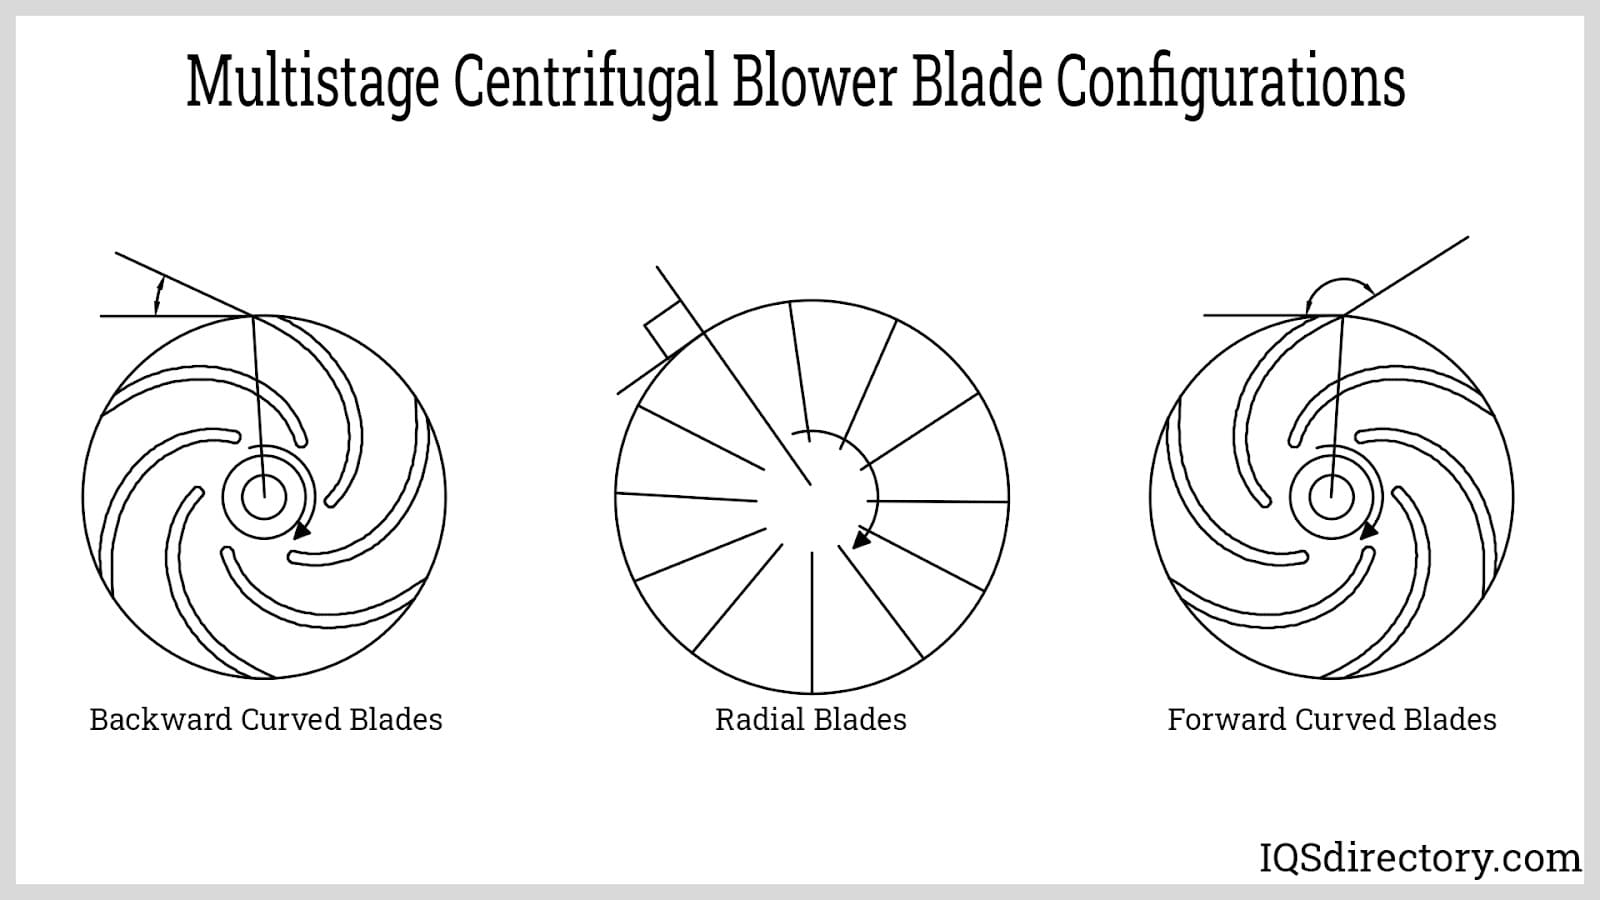 Multistage Centrifugal Blower Blade Configurations